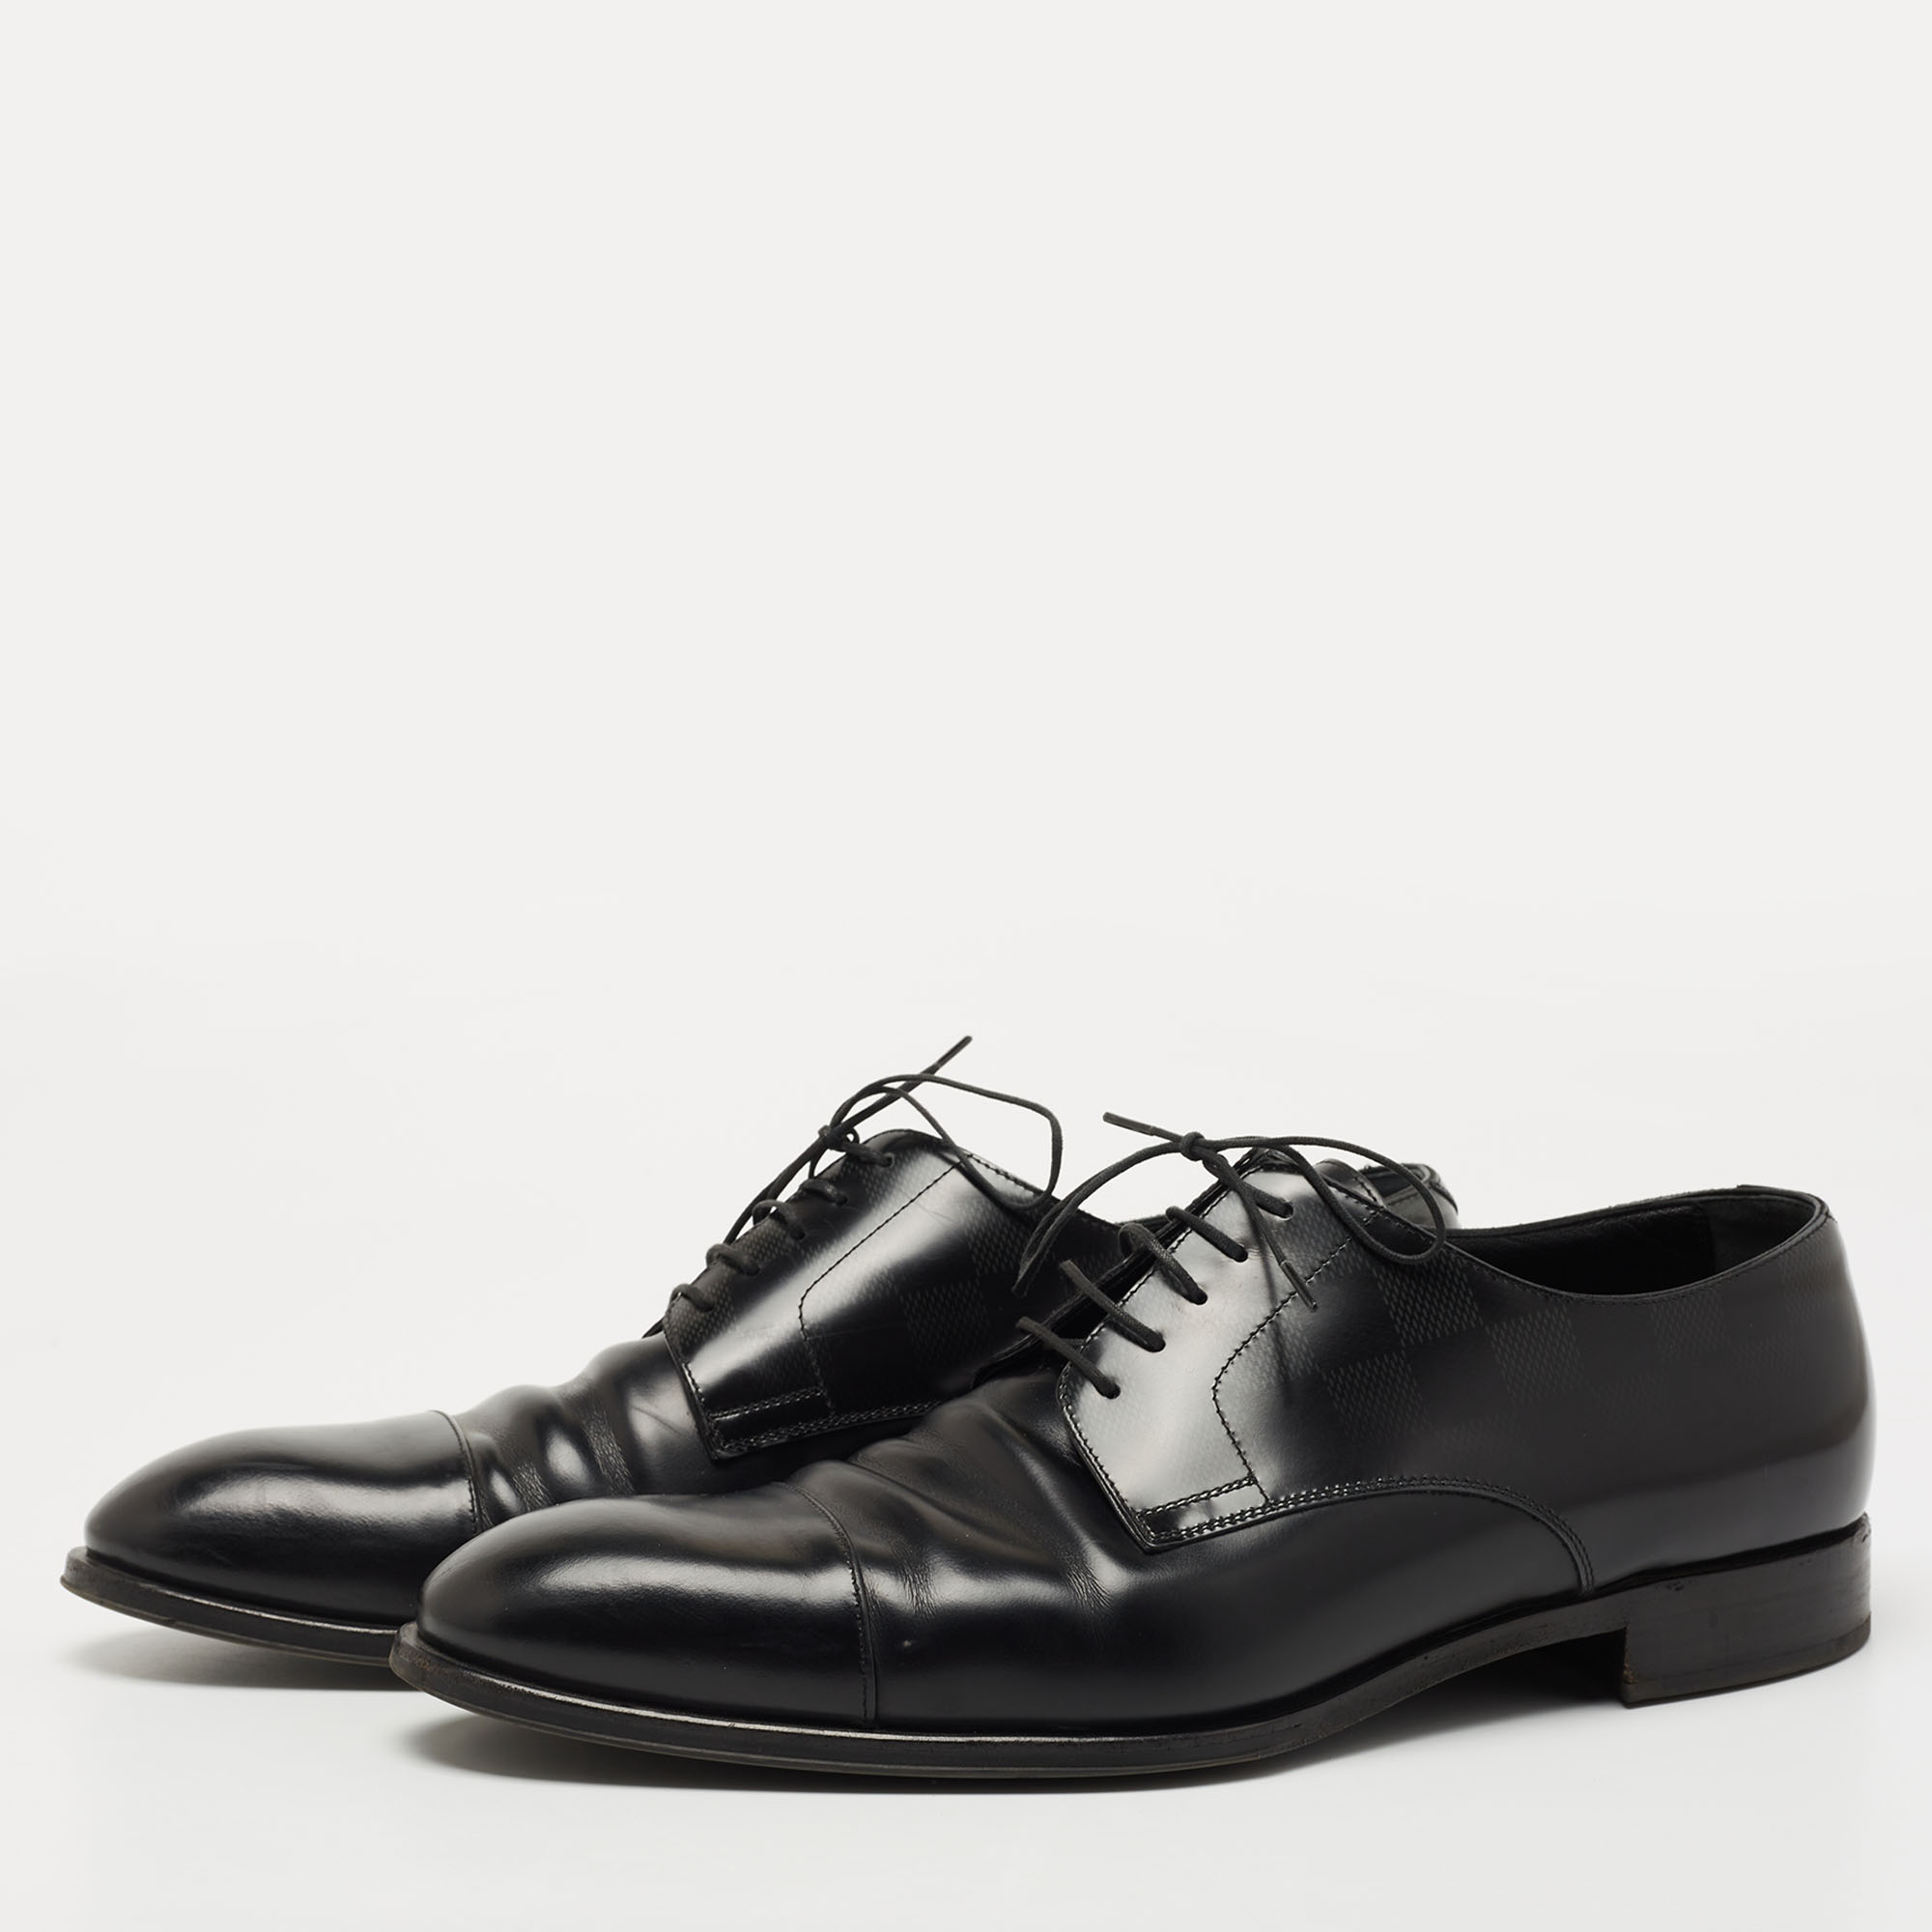 

Louis Vuitton Black Damier Embossed Leather Lace Up Oxfords Size